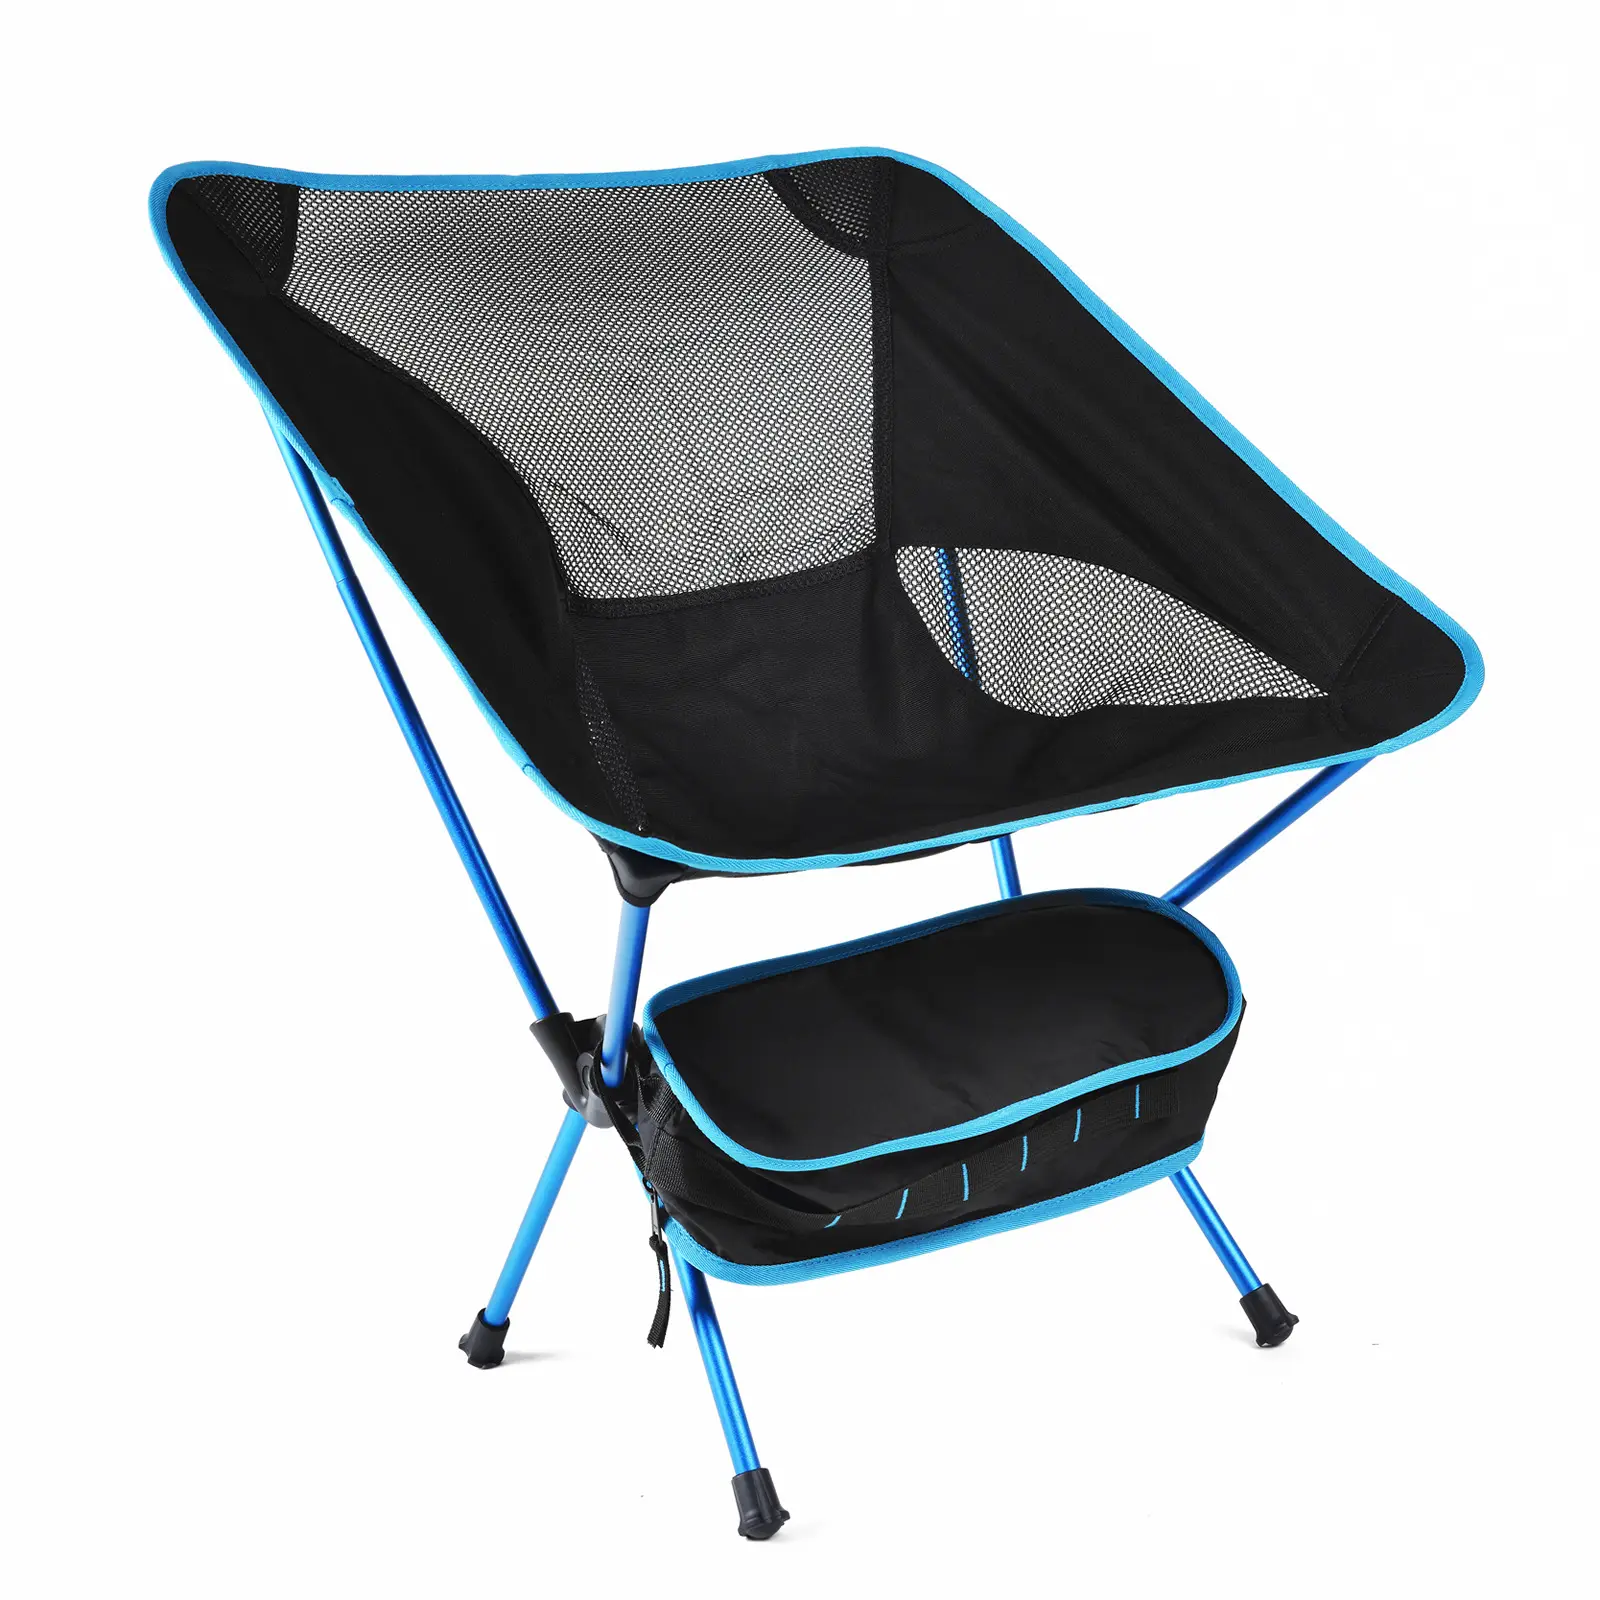 Lightweight backpack Portable fishing Camp moon Chair folding beach camping chairs outdoor